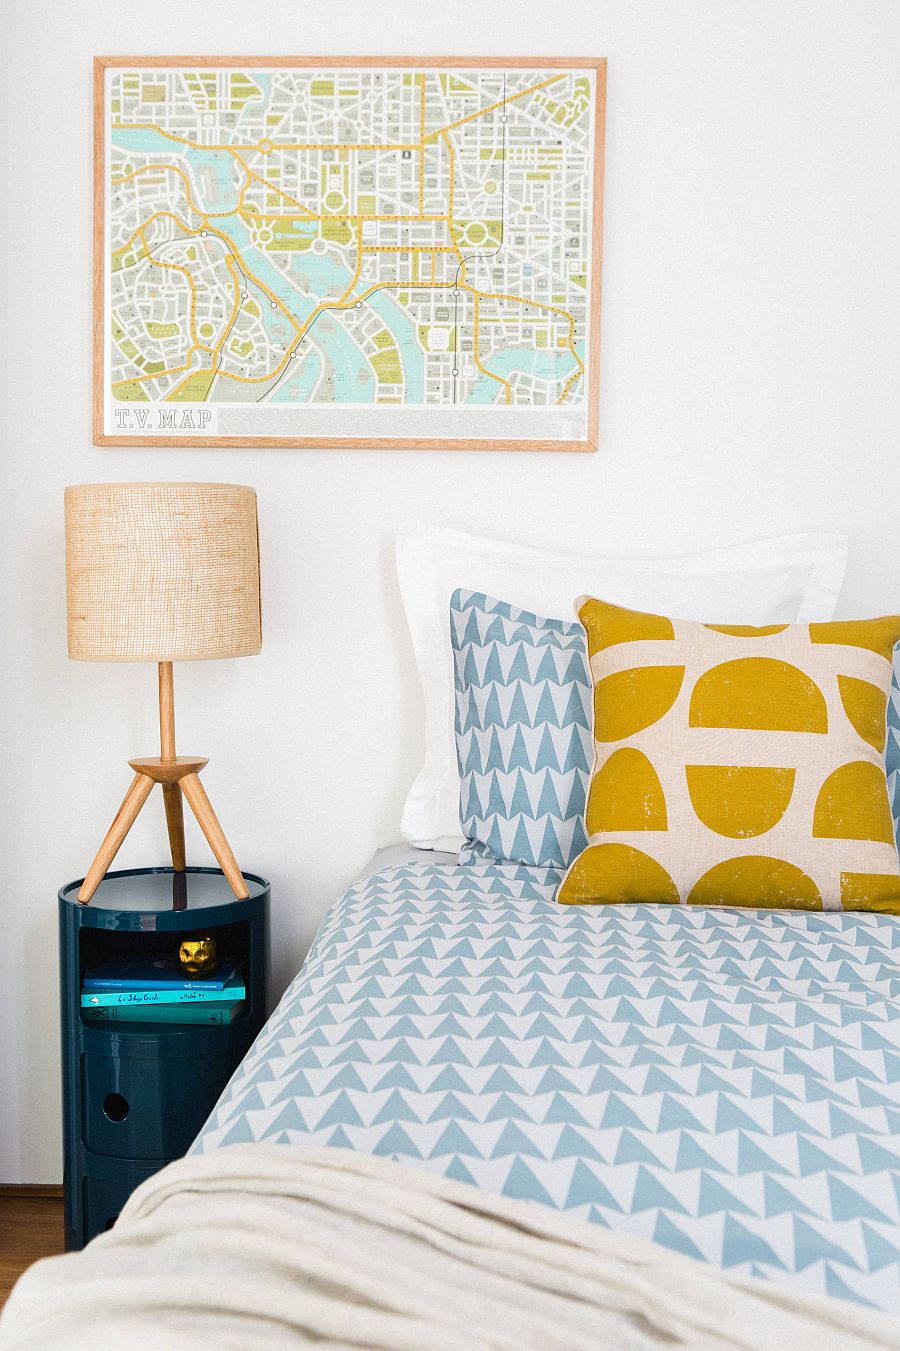 Framed-maps-are-an-easy-way-to-add-both-color-and-pattern-to-the-bedroom-73876